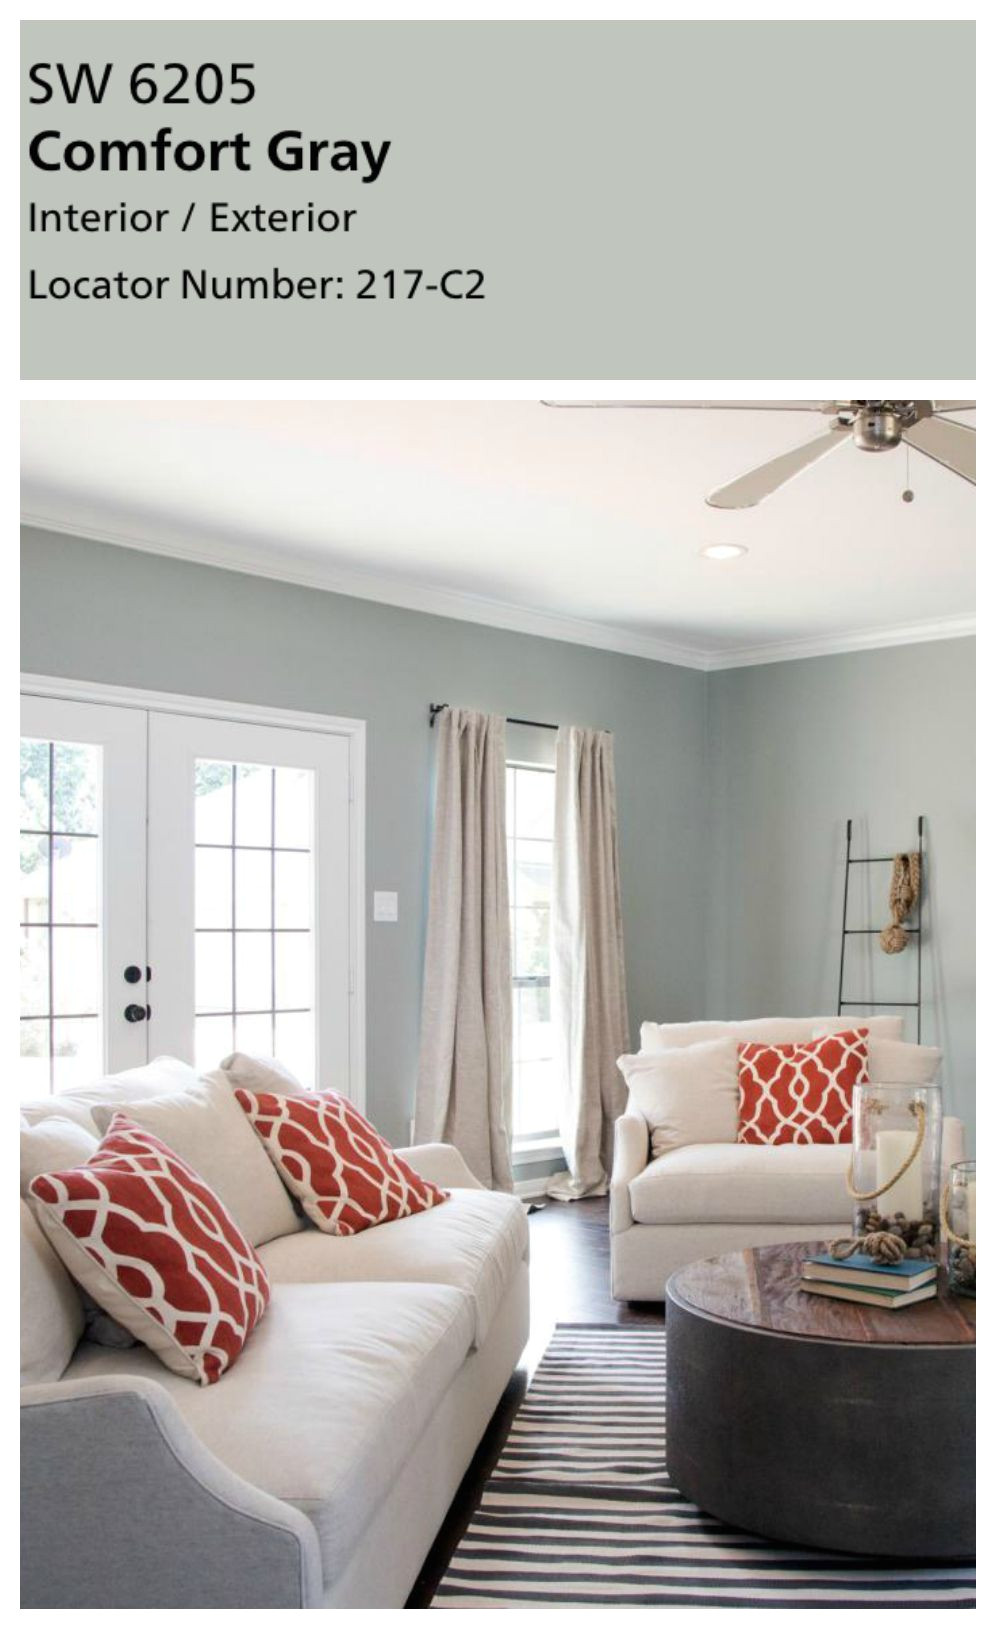 joanna s favorite paint colors sherwin williams comfort gray really isn t very gray at all in my opinion it s another dusty blue green